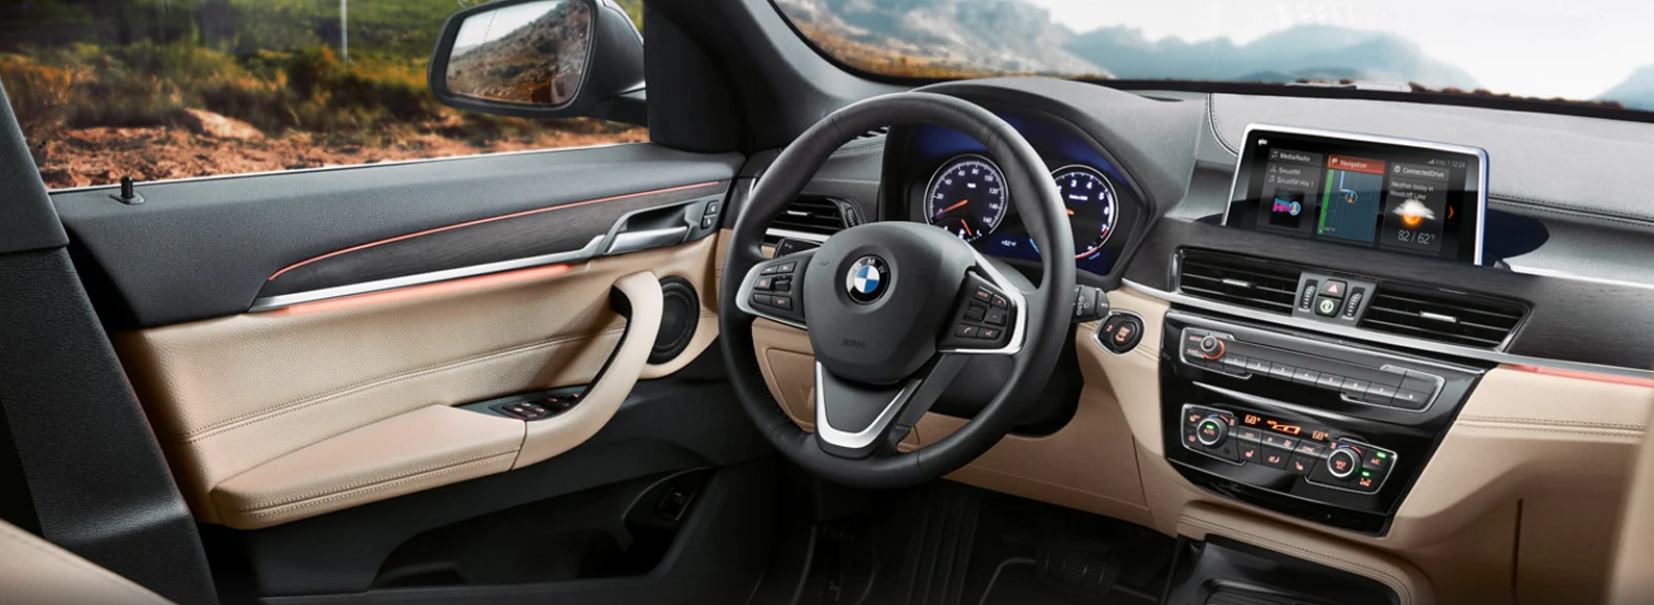 BMW X1 Interior shot over looking a mountian view